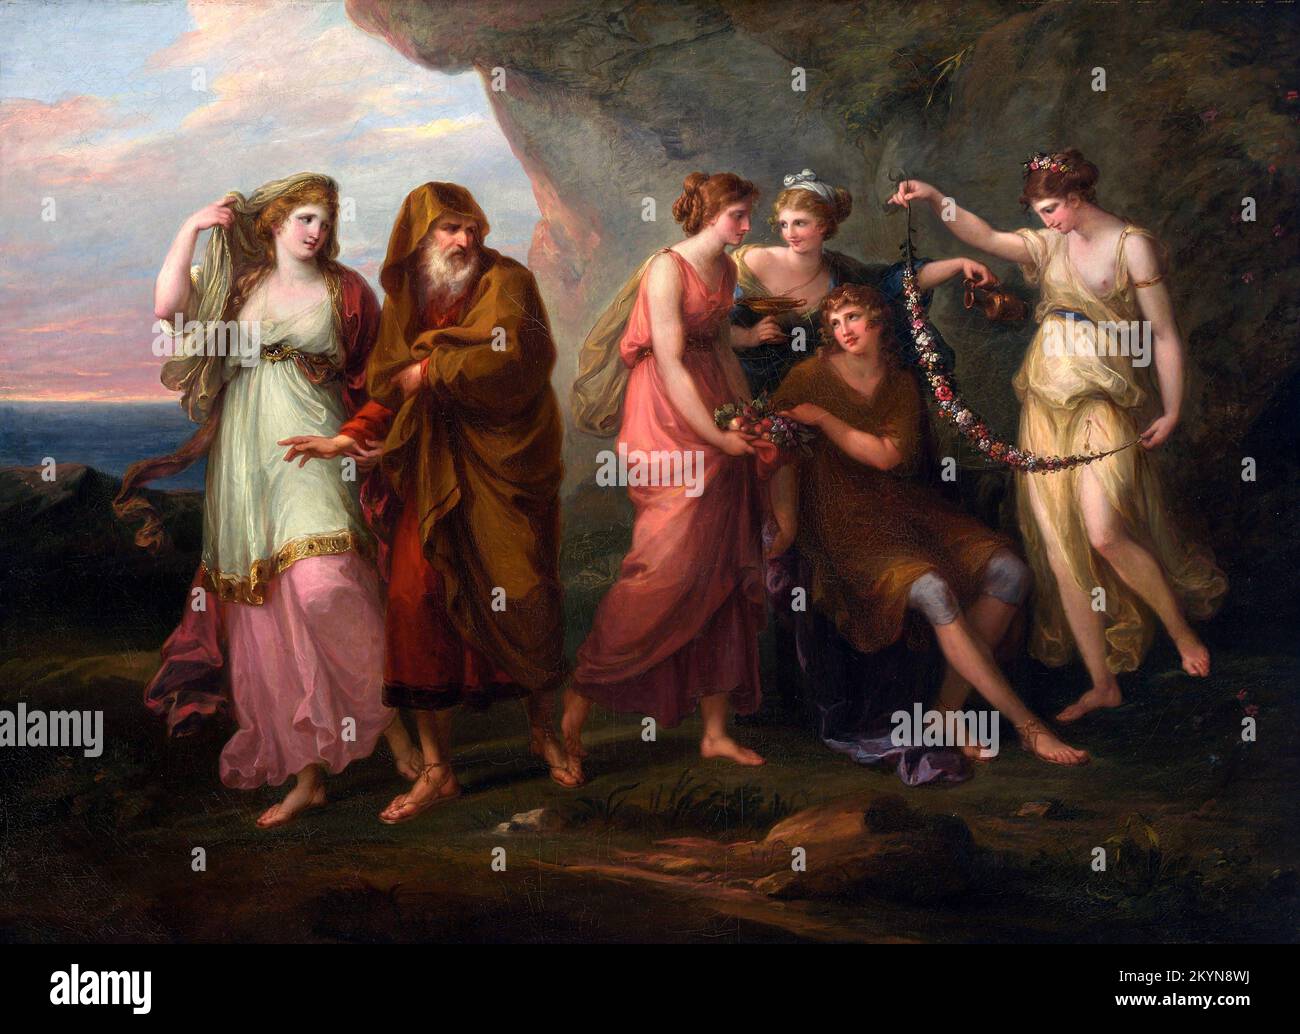 Angelia Kauffman. Painting entitled Telemachus and the Nymphs of Calypso by the Swiss painter, Angelica Kauffmann (1741-1807), oil on canvas, 1782 Stock Photo